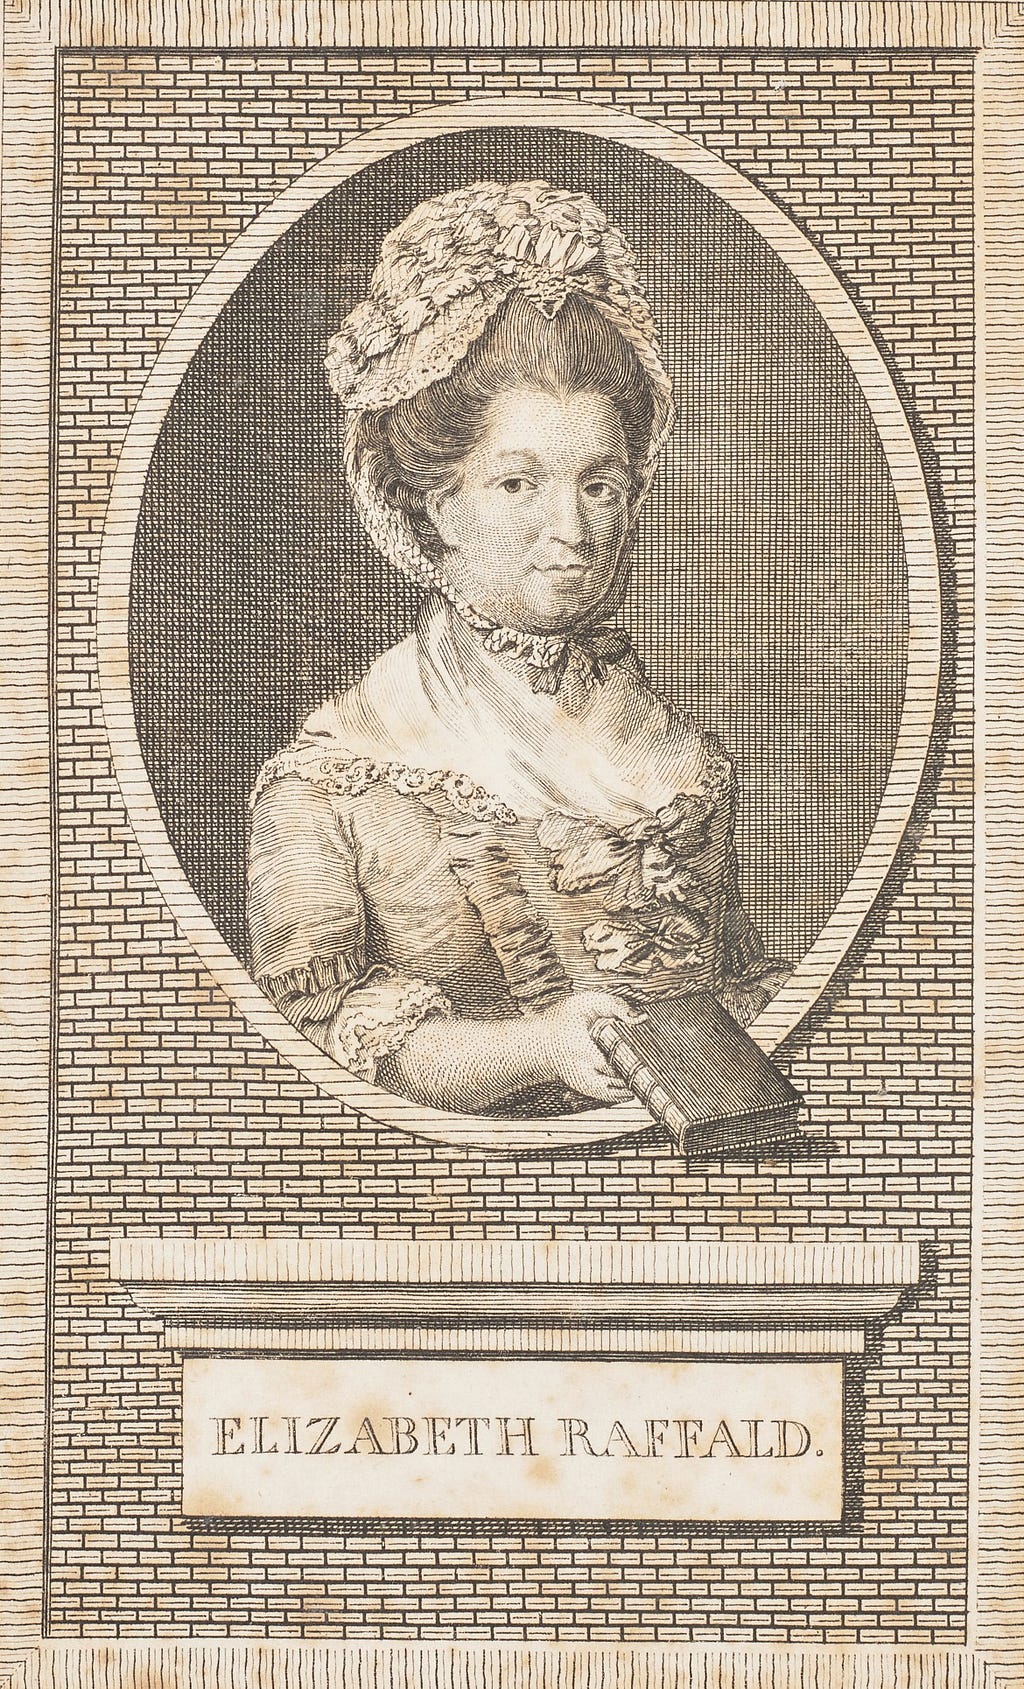 Head and shoulders portrait of a woman in Georgian dress and bonnet holding a closed book in her right hand.